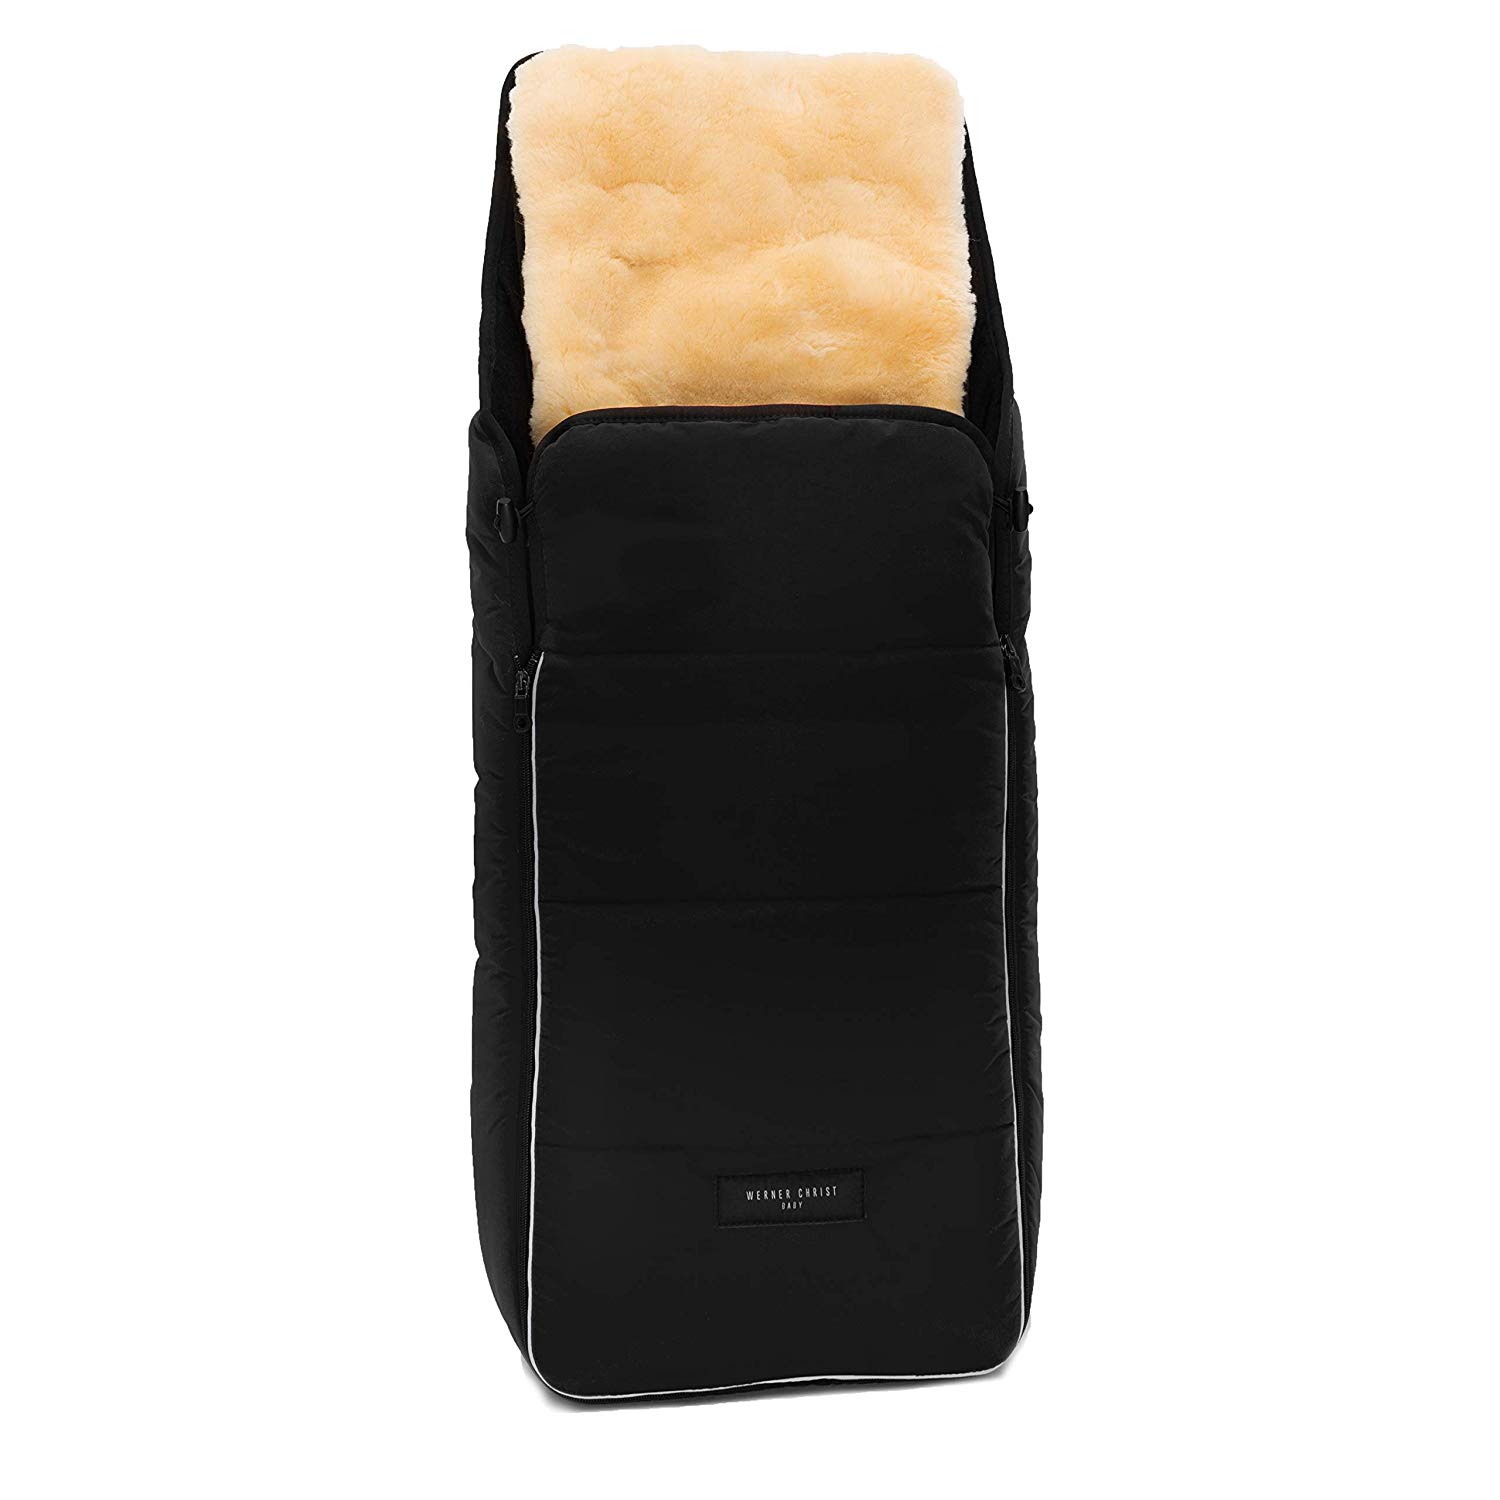 Christ Cortina von Werner Baby Sheepskin Foot Muff, Thermal Sheepskin Foot Muff, Winter Sleeping Bag with Removable Real Fur, Can be Used as an Insert Cushion for Pushchair (2-in-1) in Beige, Grey, Blue, Black, Red, Brown